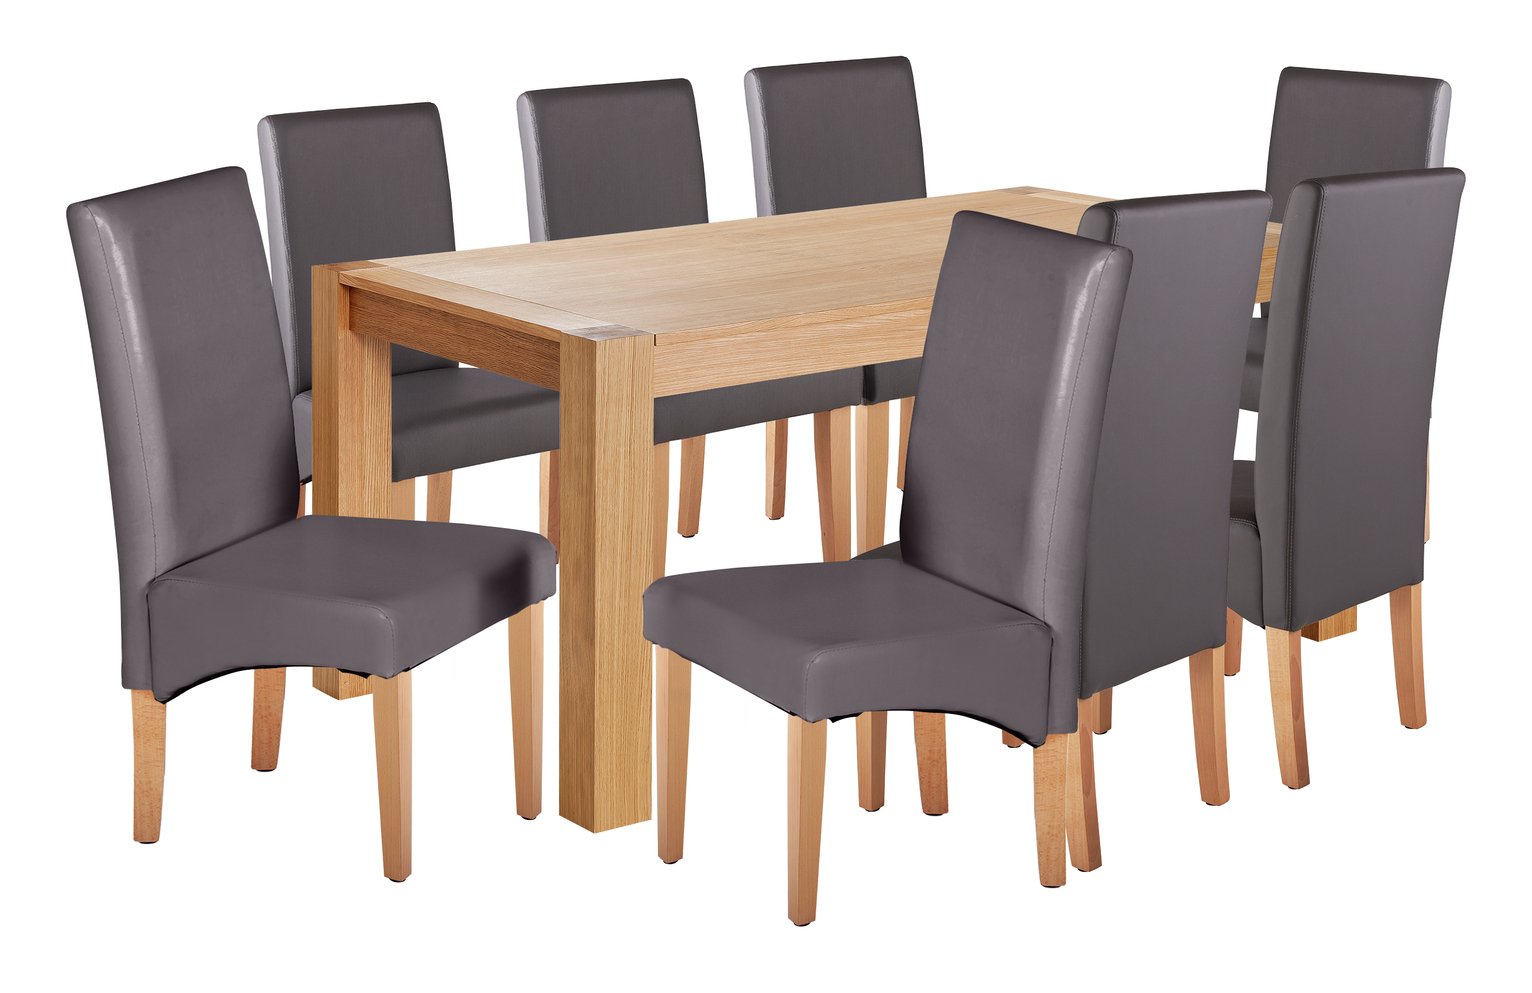 Argos Home Alston Oak Veneer Table and 8 Chairs - Charcoal